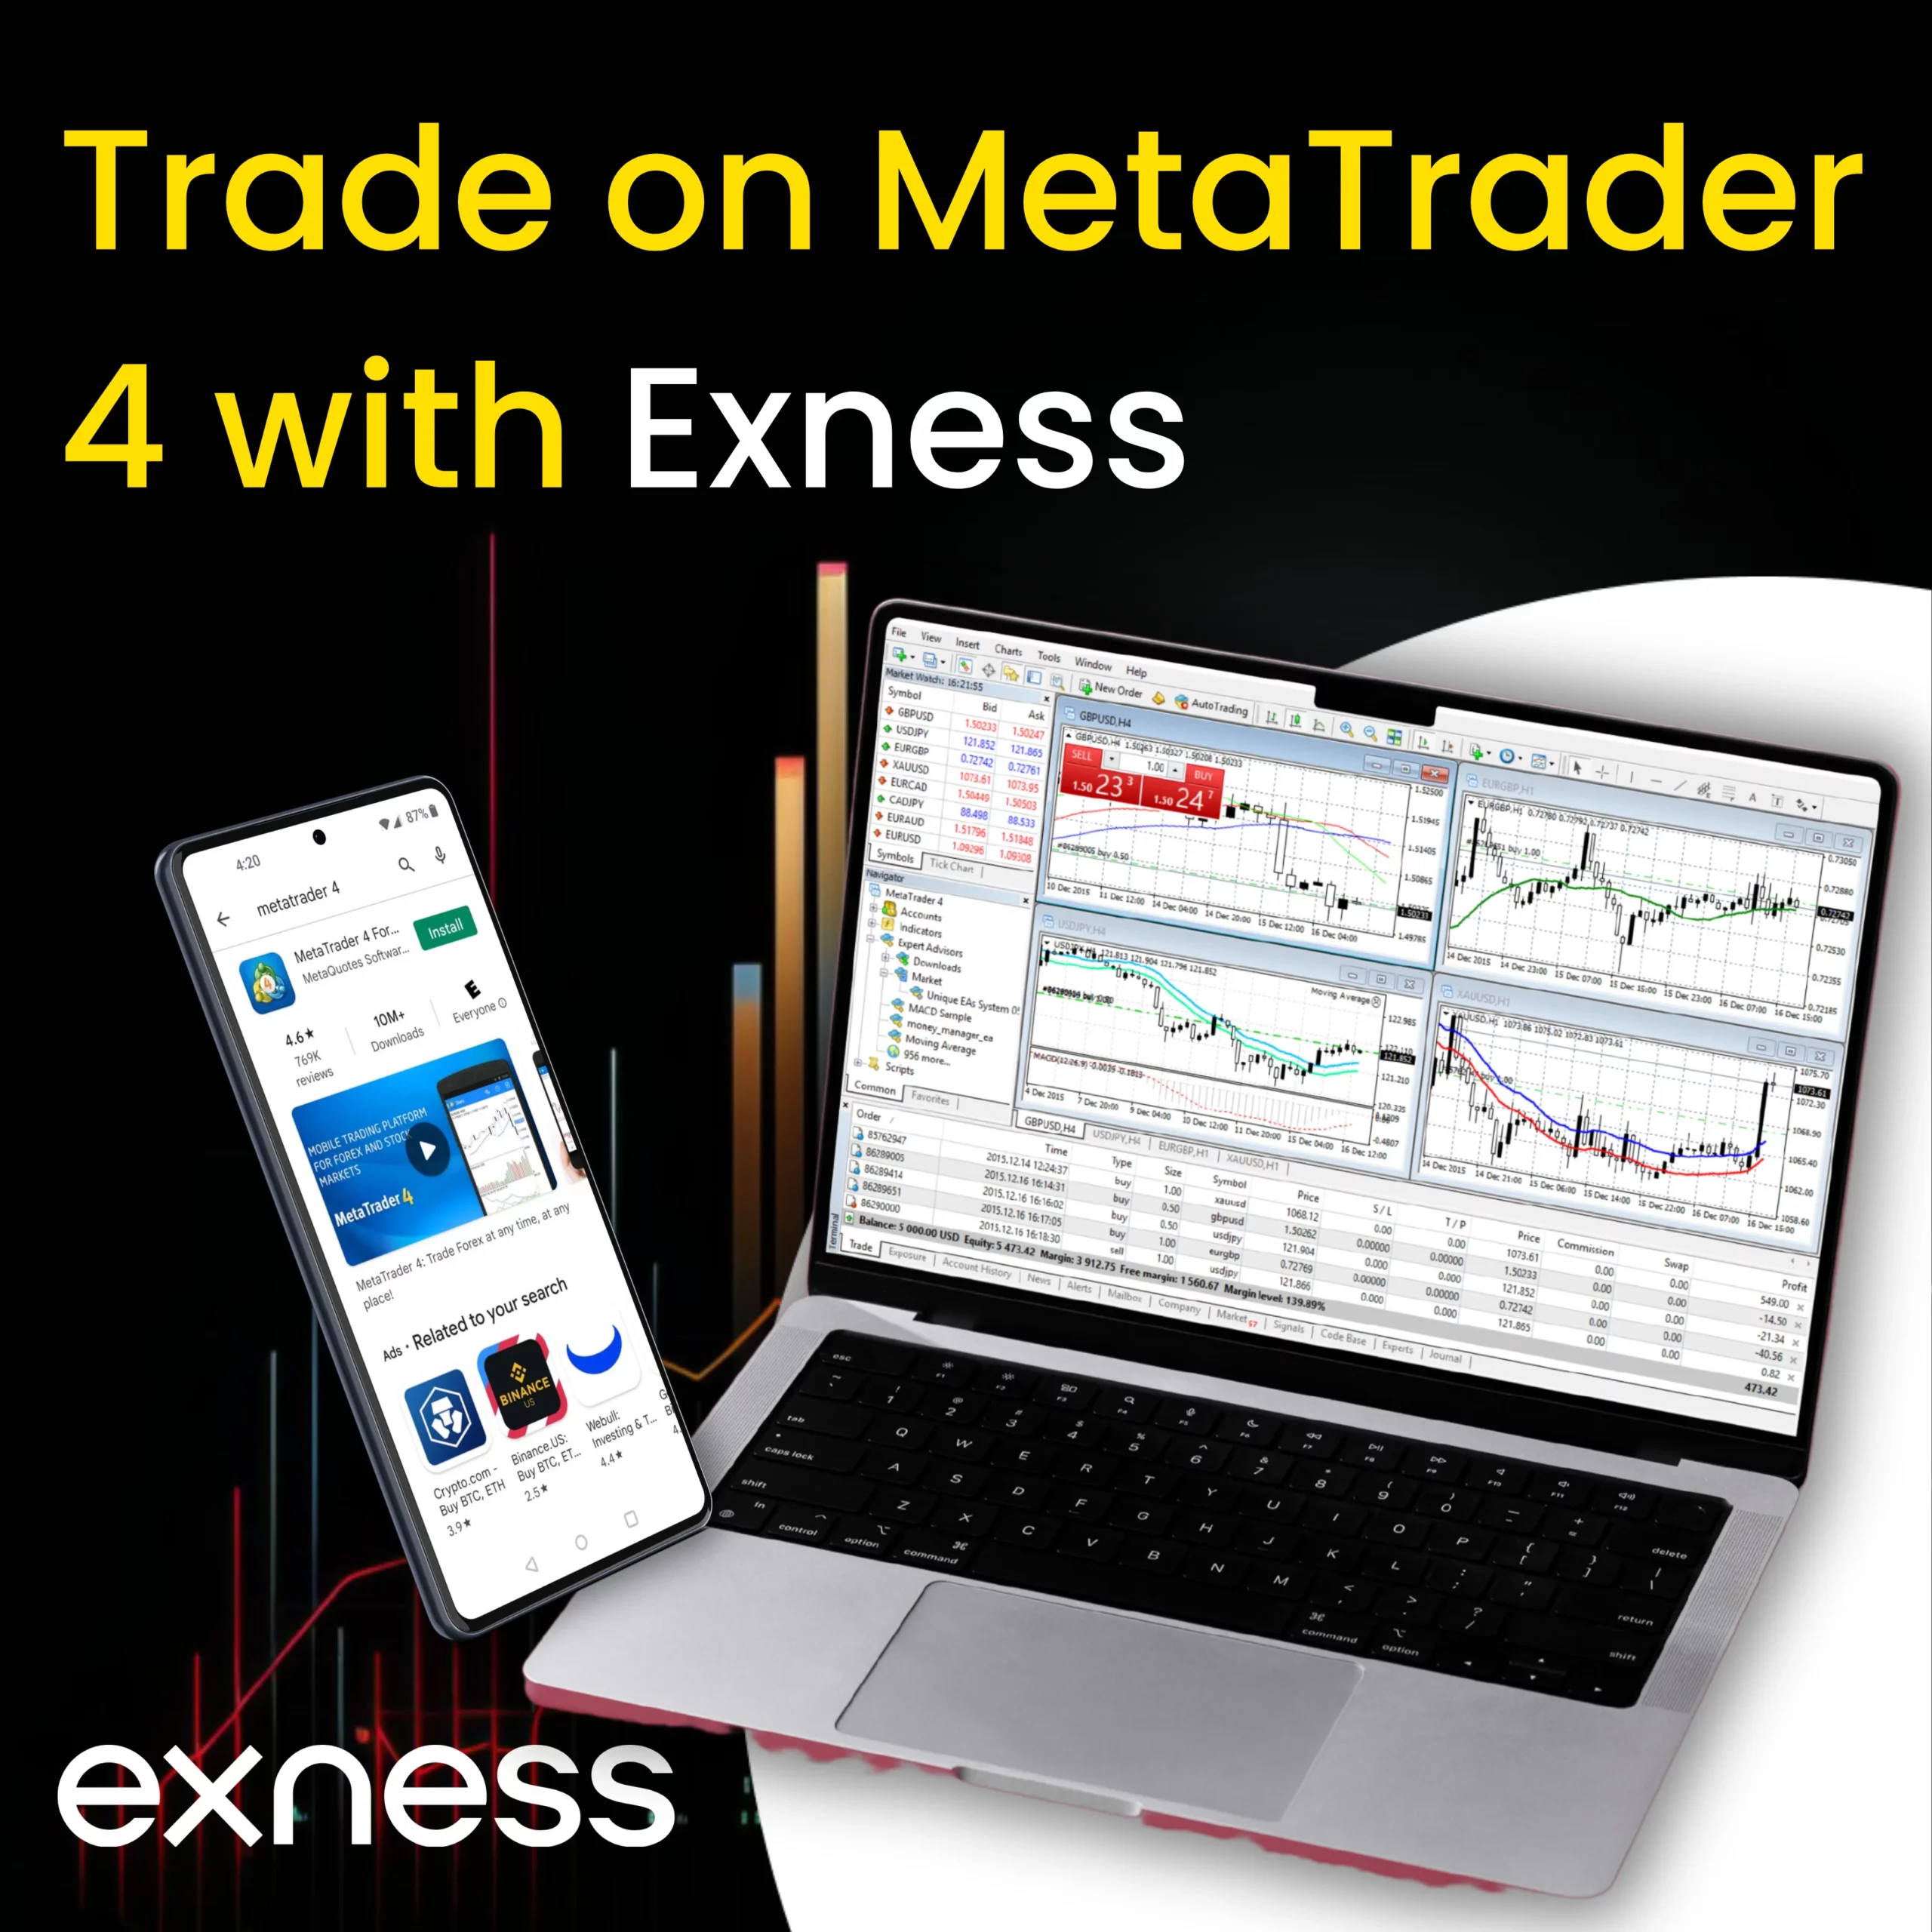 Download MetaTrader 4 from Exness